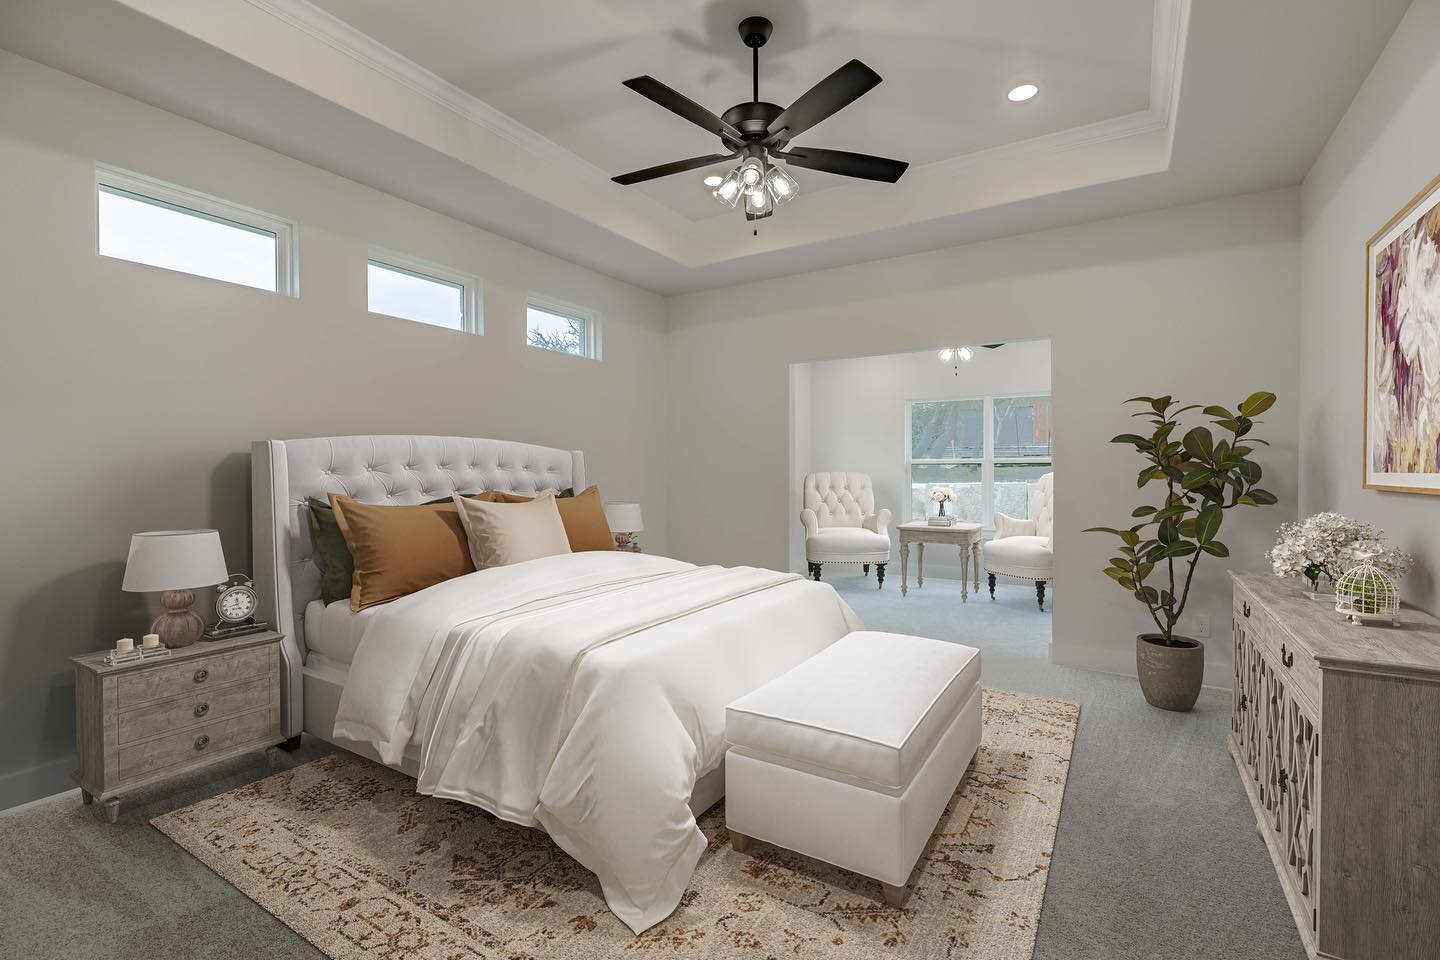 Stunning primary bedroom in 2016 Chalet Circle! Plush carpeting, tray ceilings, and a sitting room make this a true primary retreat! 

(This photo is virtually staged) 

#kerrville #keptclassichomes #themeridian #hillcountry #newhome #construction #a